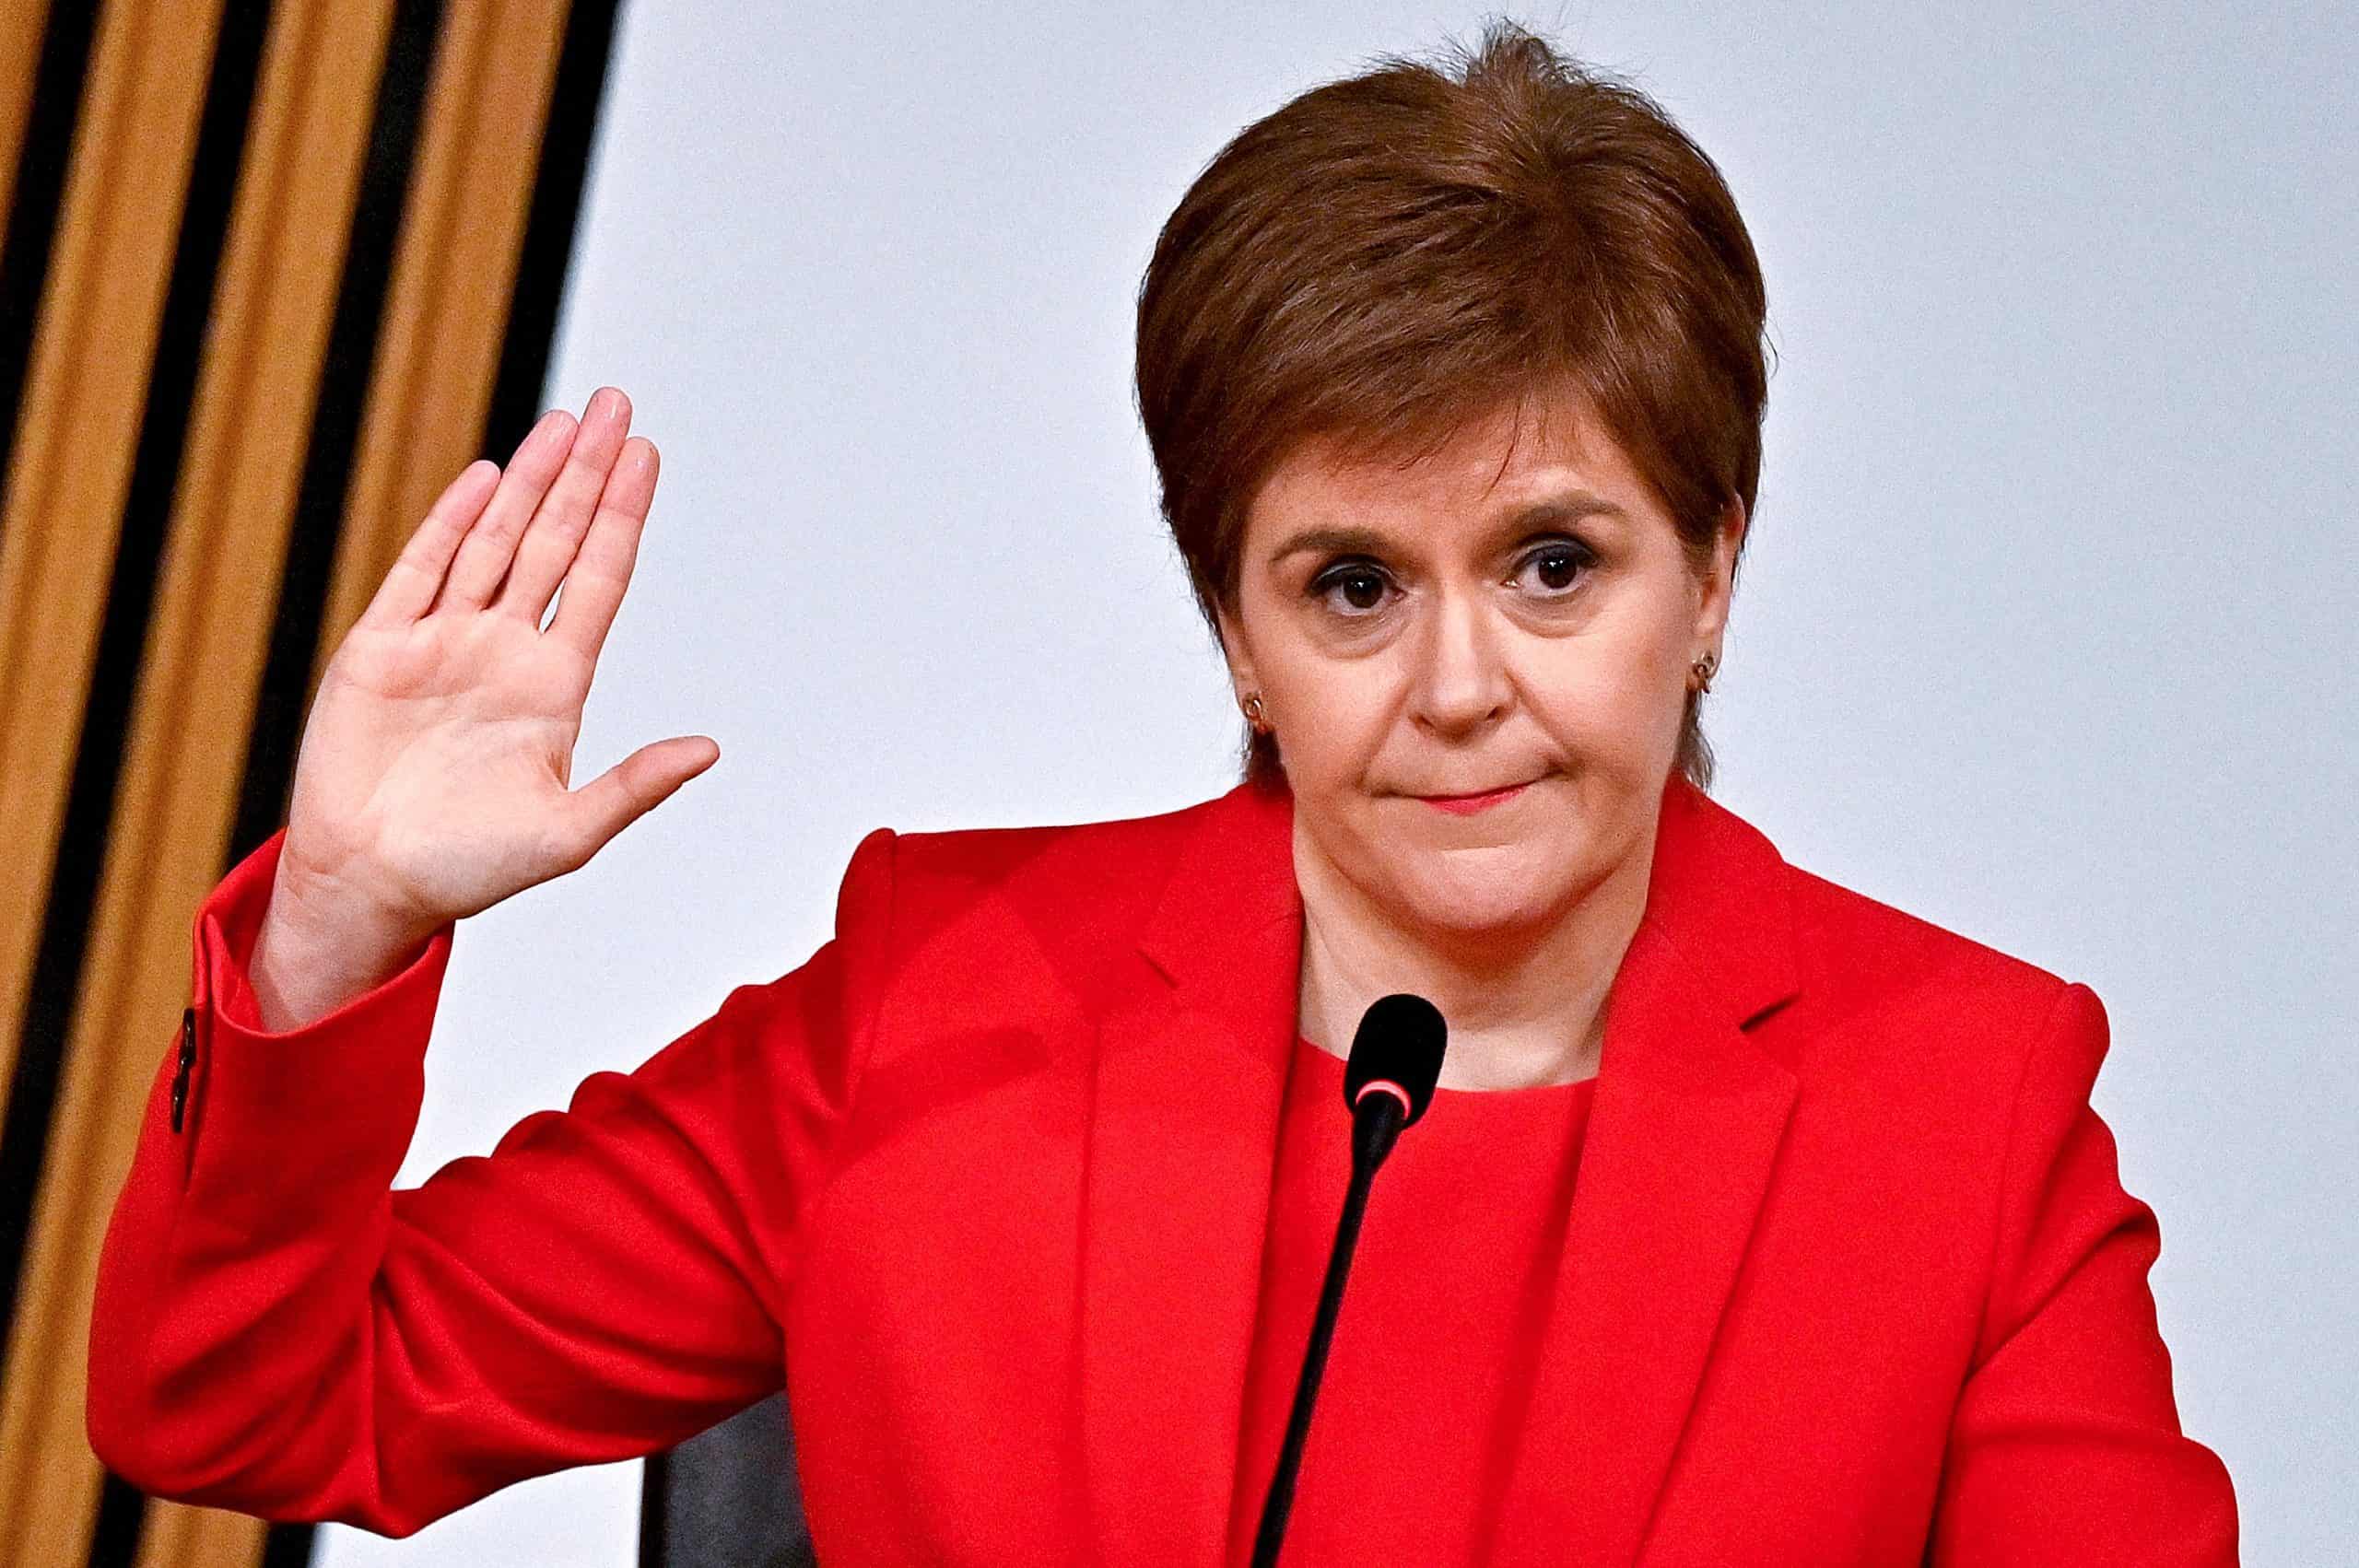 Tories threaten Sturgeon with motion of no confidence unless she resigns